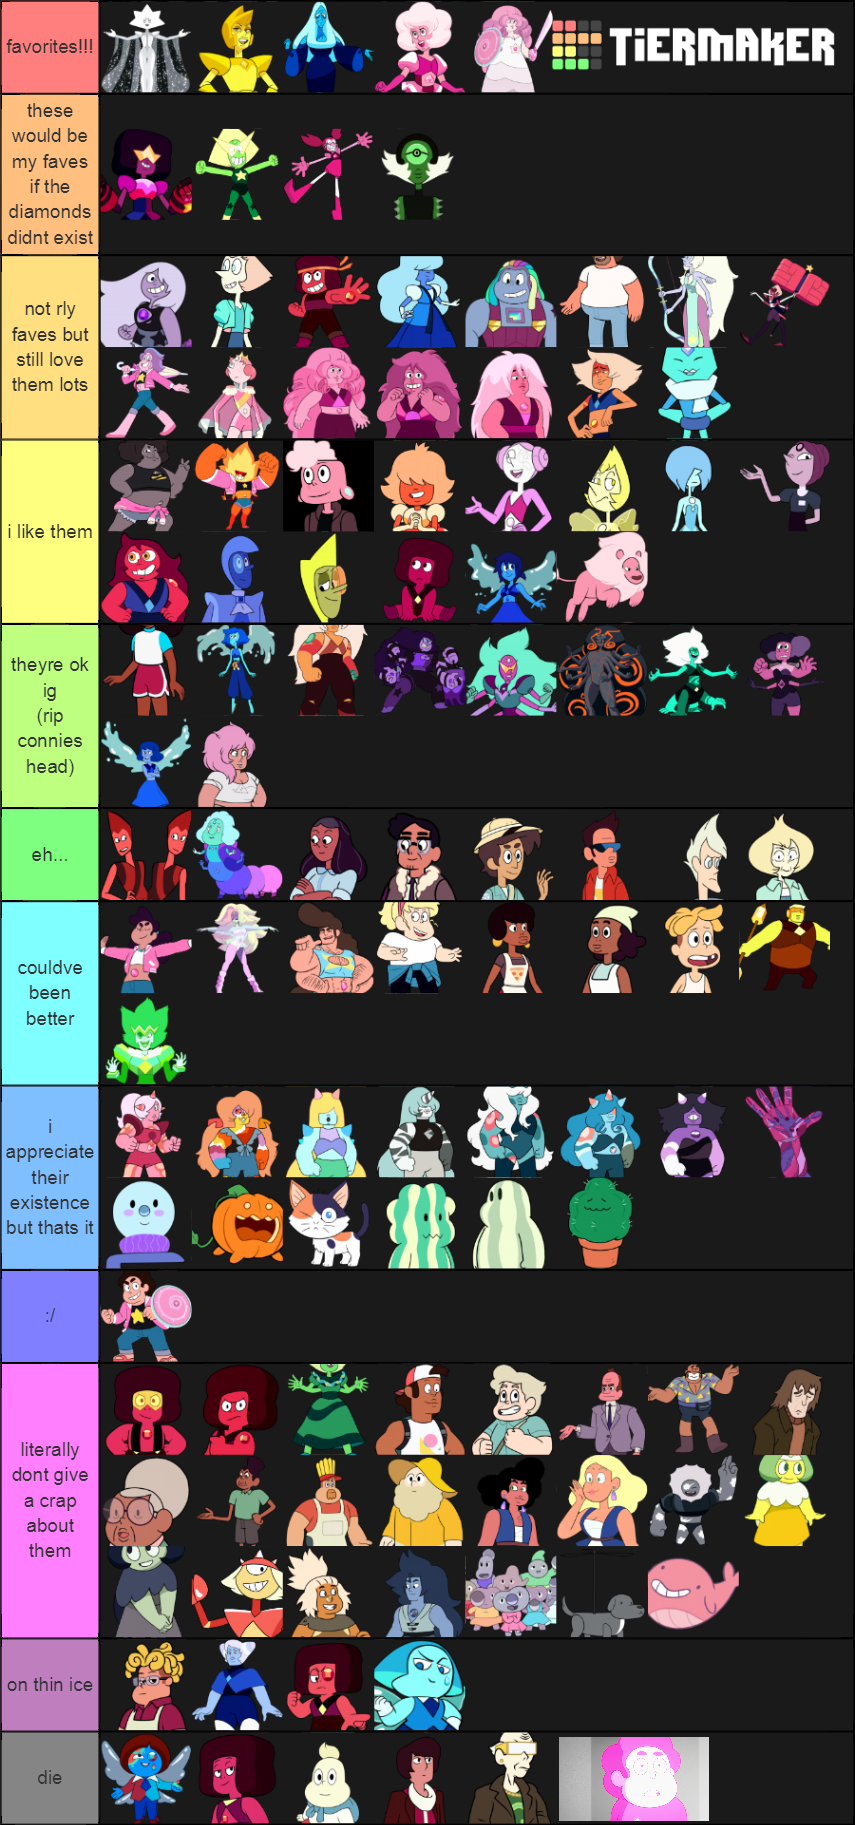 List of Steven Universe characters - Wikipedia